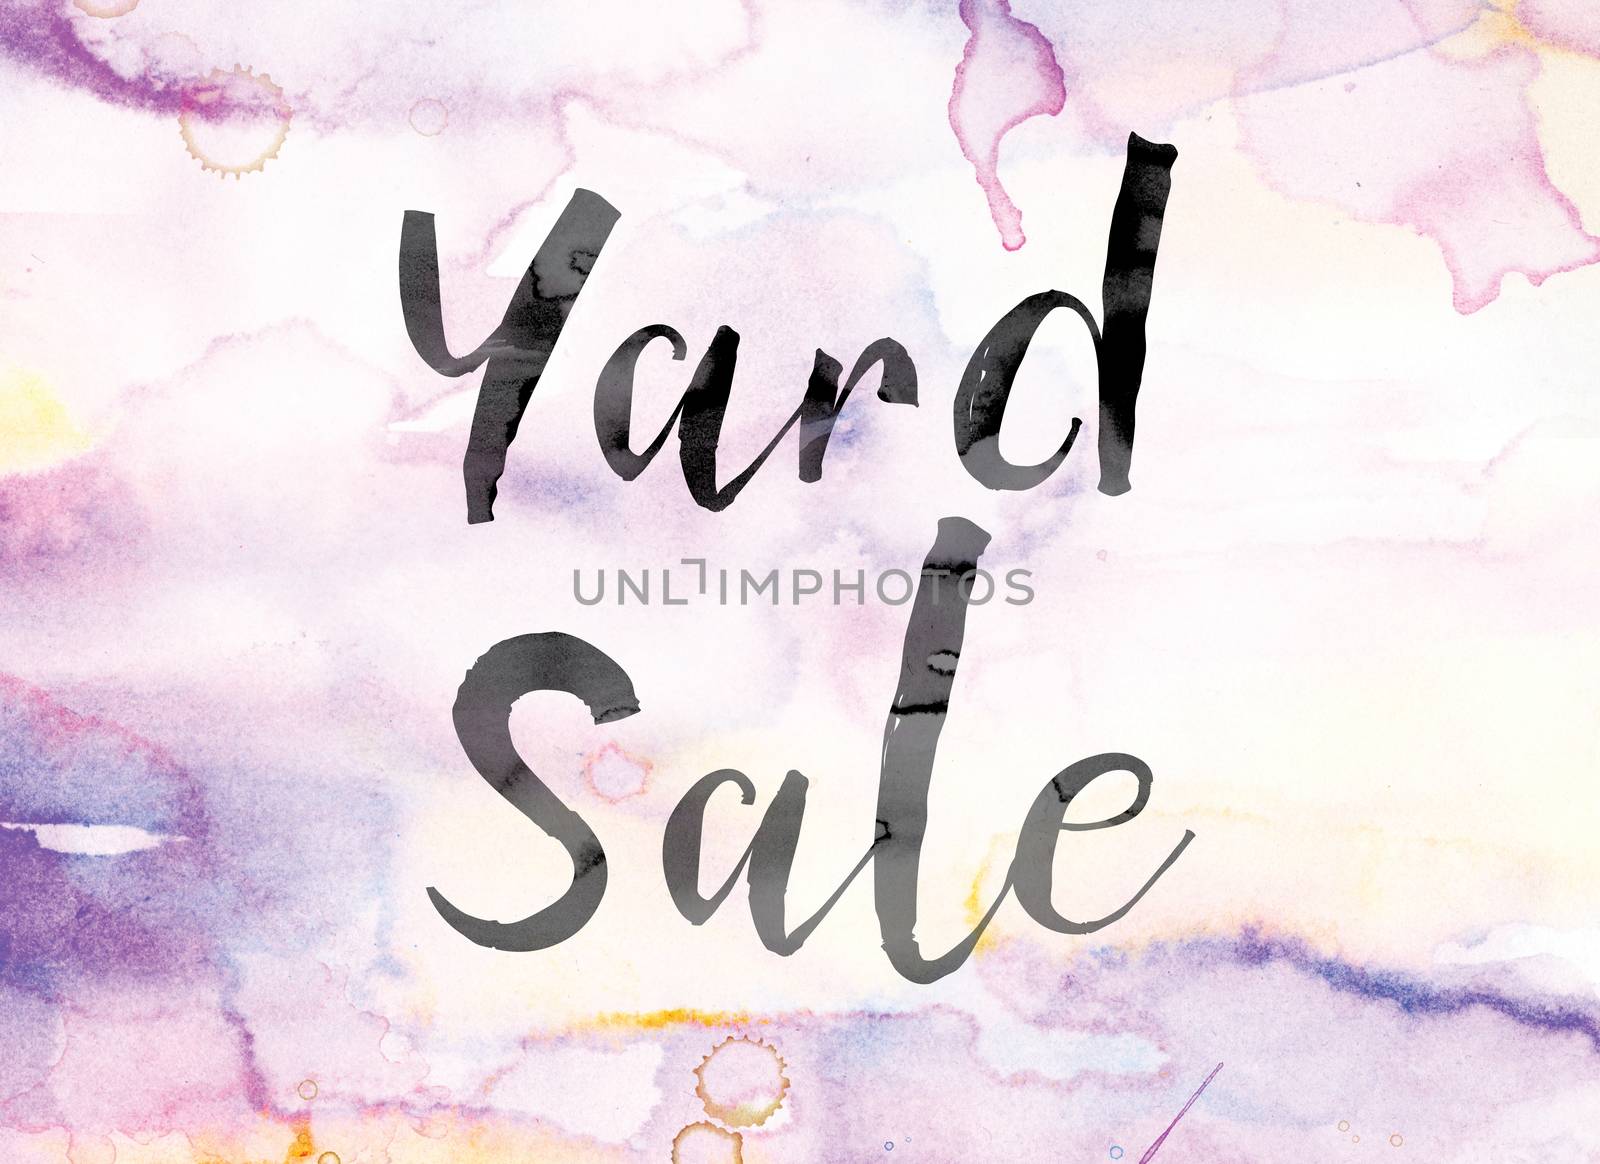 The word "Yard Sale" painted in black ink over a colorful watercolor washed background concept and theme.